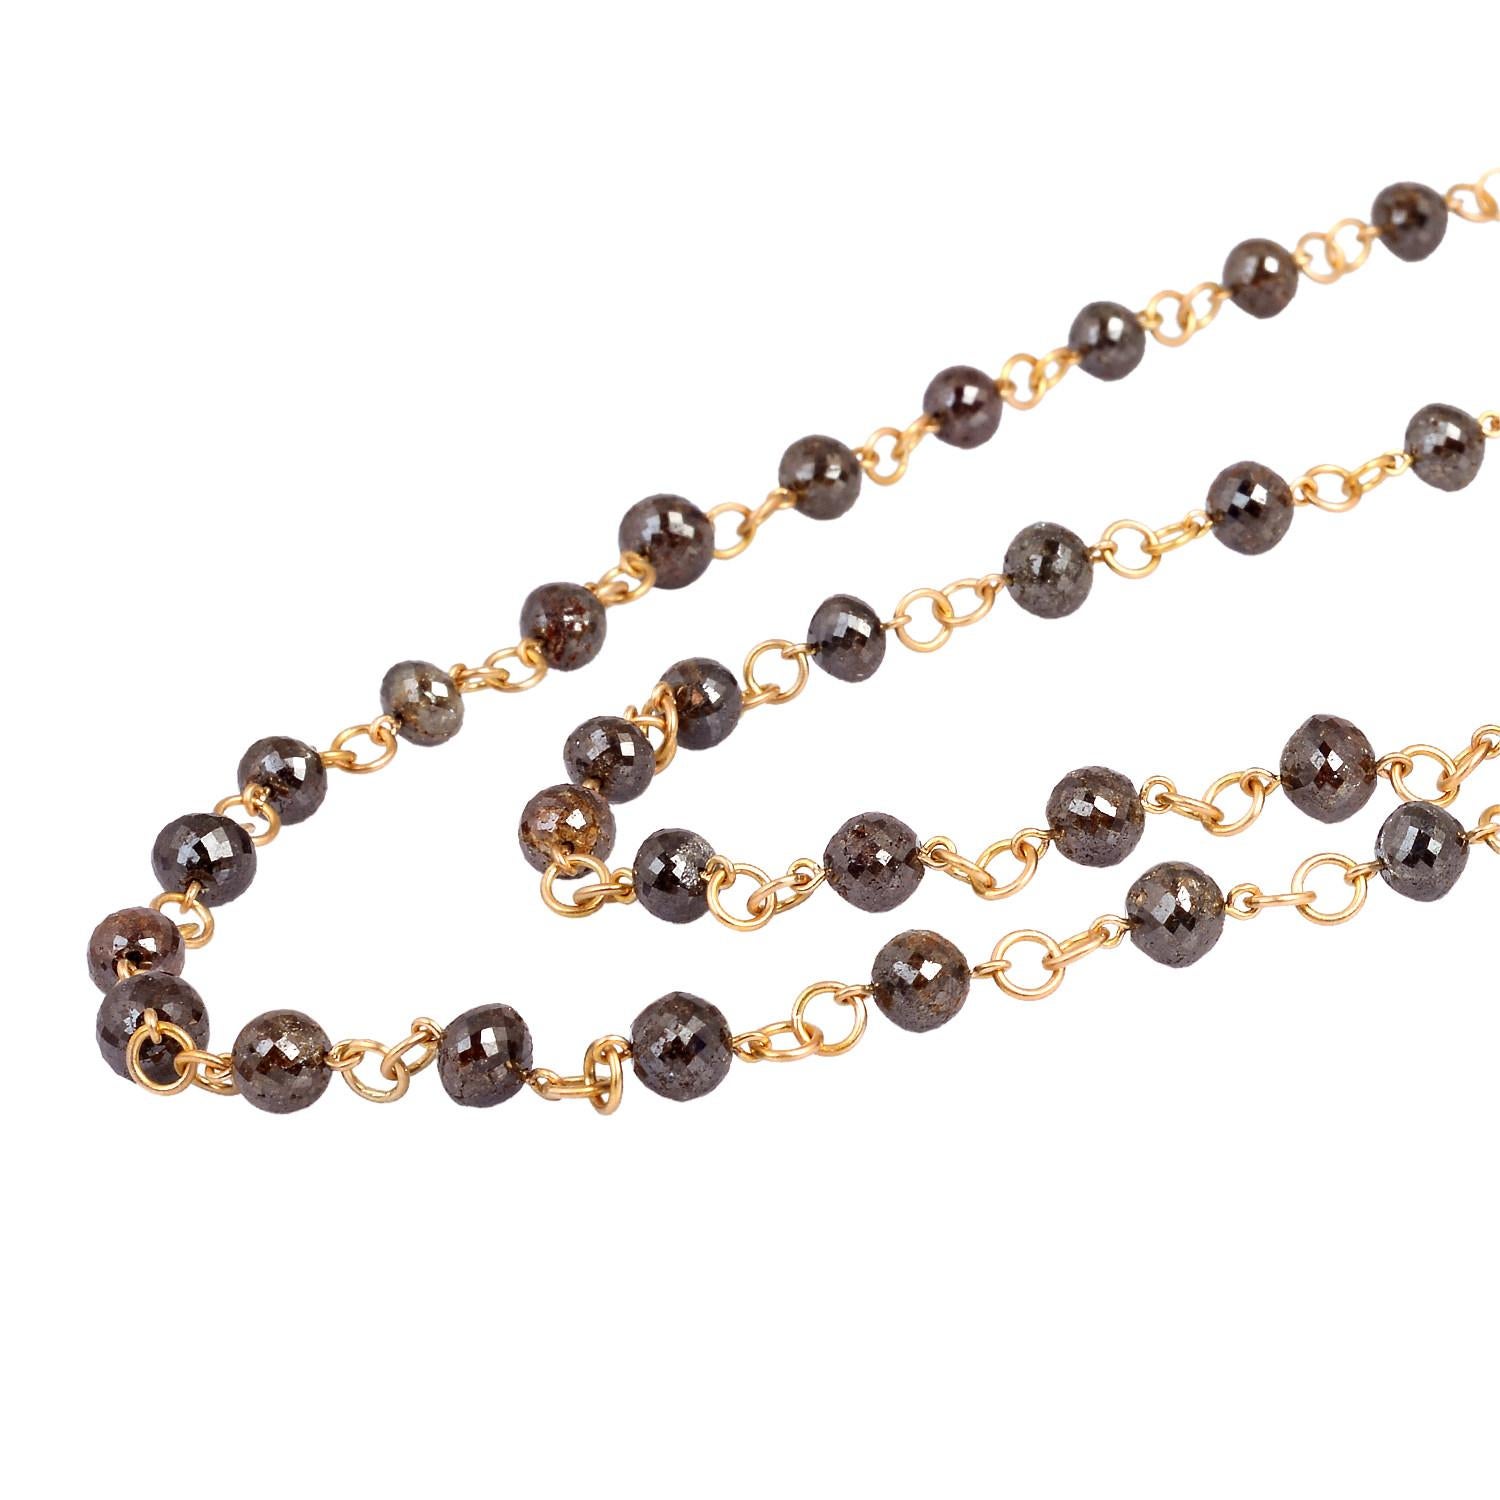 This Brown Ice Ball Diamond Necklace in 18K Rose Gold is exquisite and is 42 inch long. This necklace can be worn from over the head and can be layered.

Gold: 18KT:22.93gms
Diamind: 205.67cts